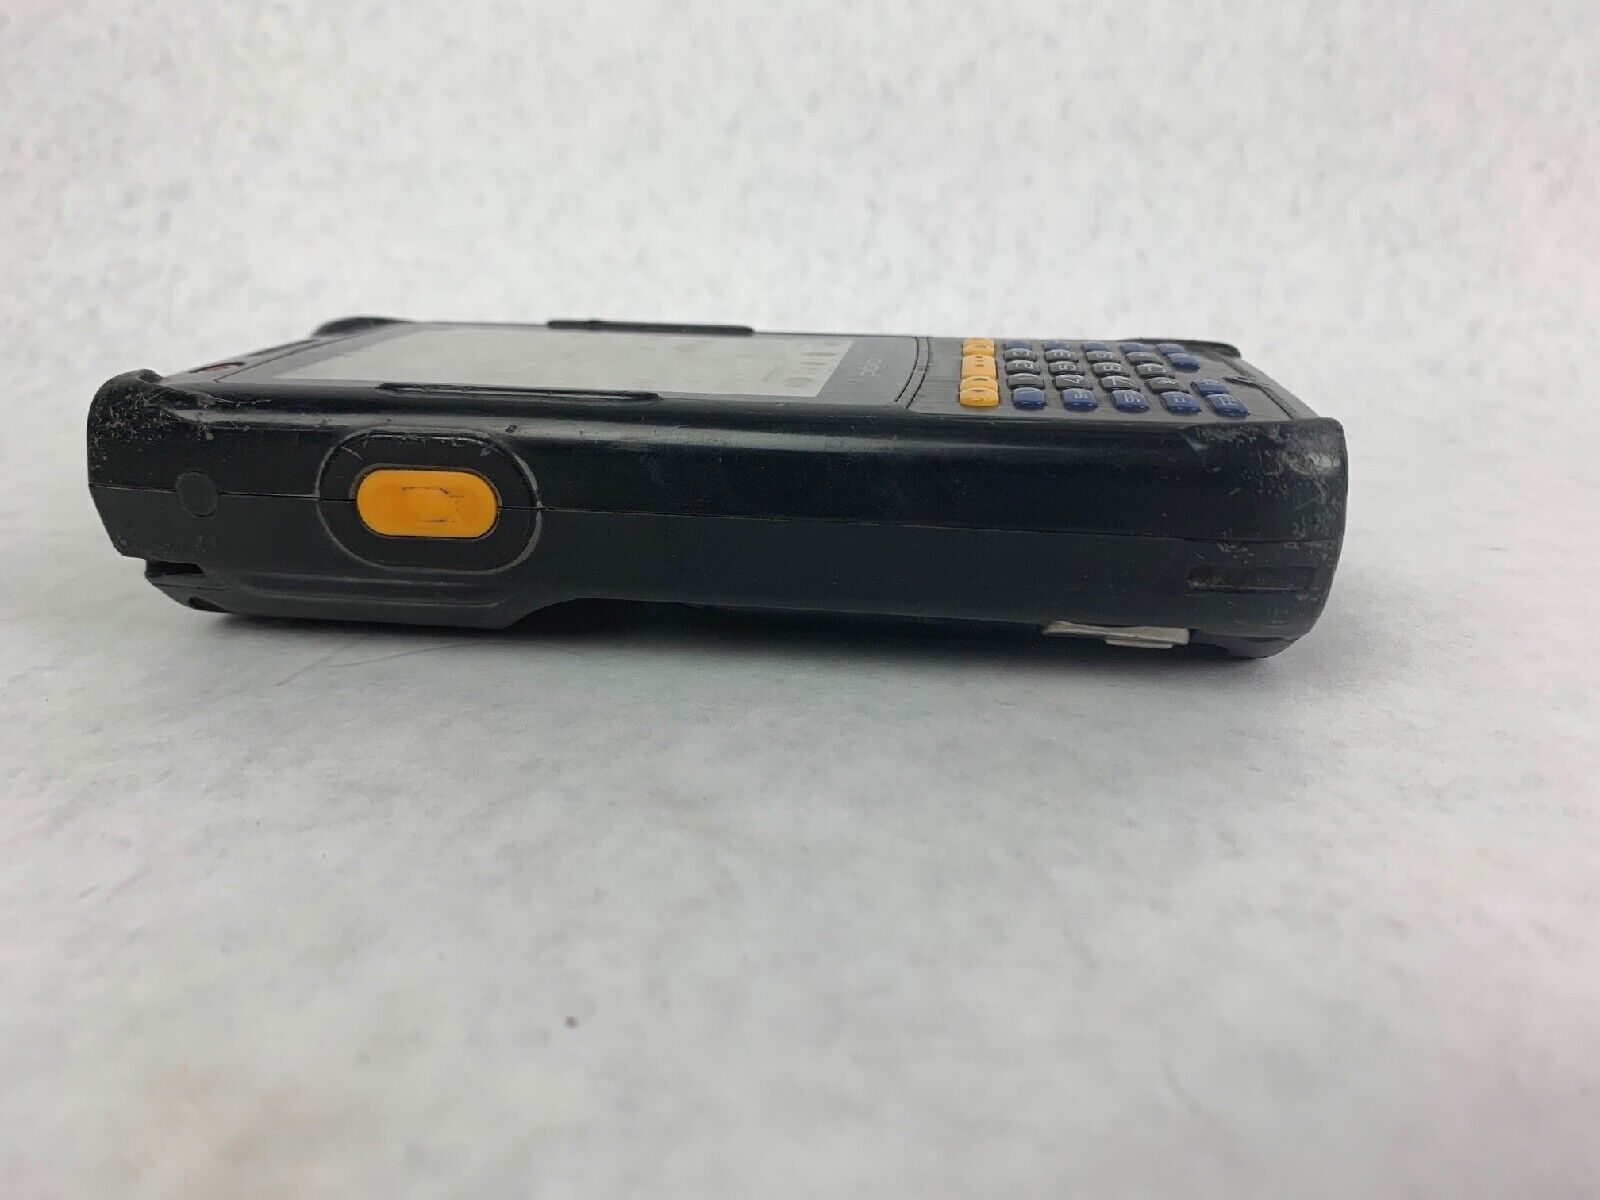 Bluebird Pidion BIP 6000 Handheld Mobile Rugged Computer - No accessories